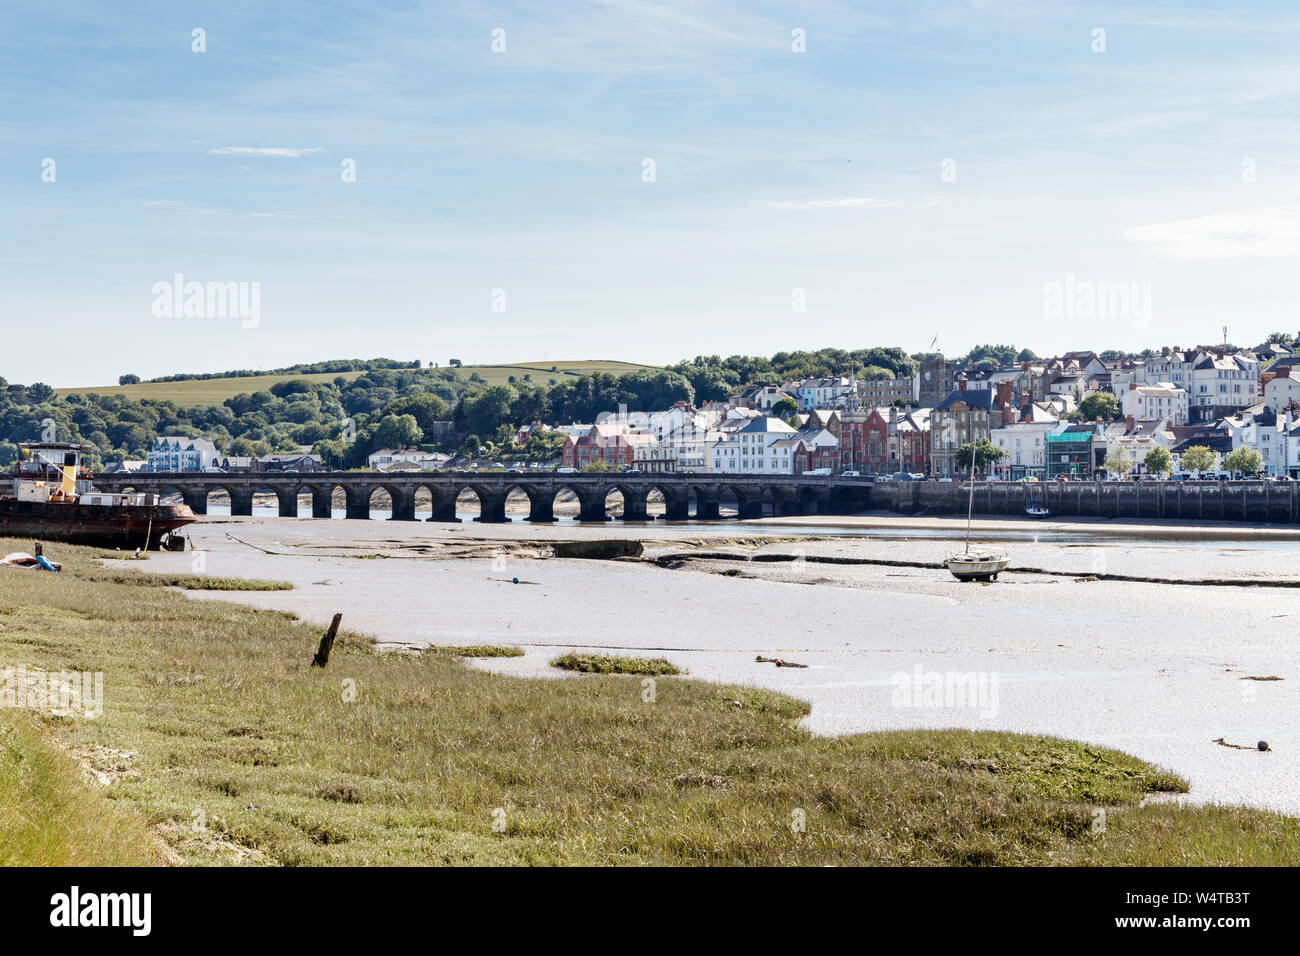 The ancient maritime town of Bideford, Devon, UK, from across the River Torridge at East The Water, the Old Bridge on the left Stock Photo